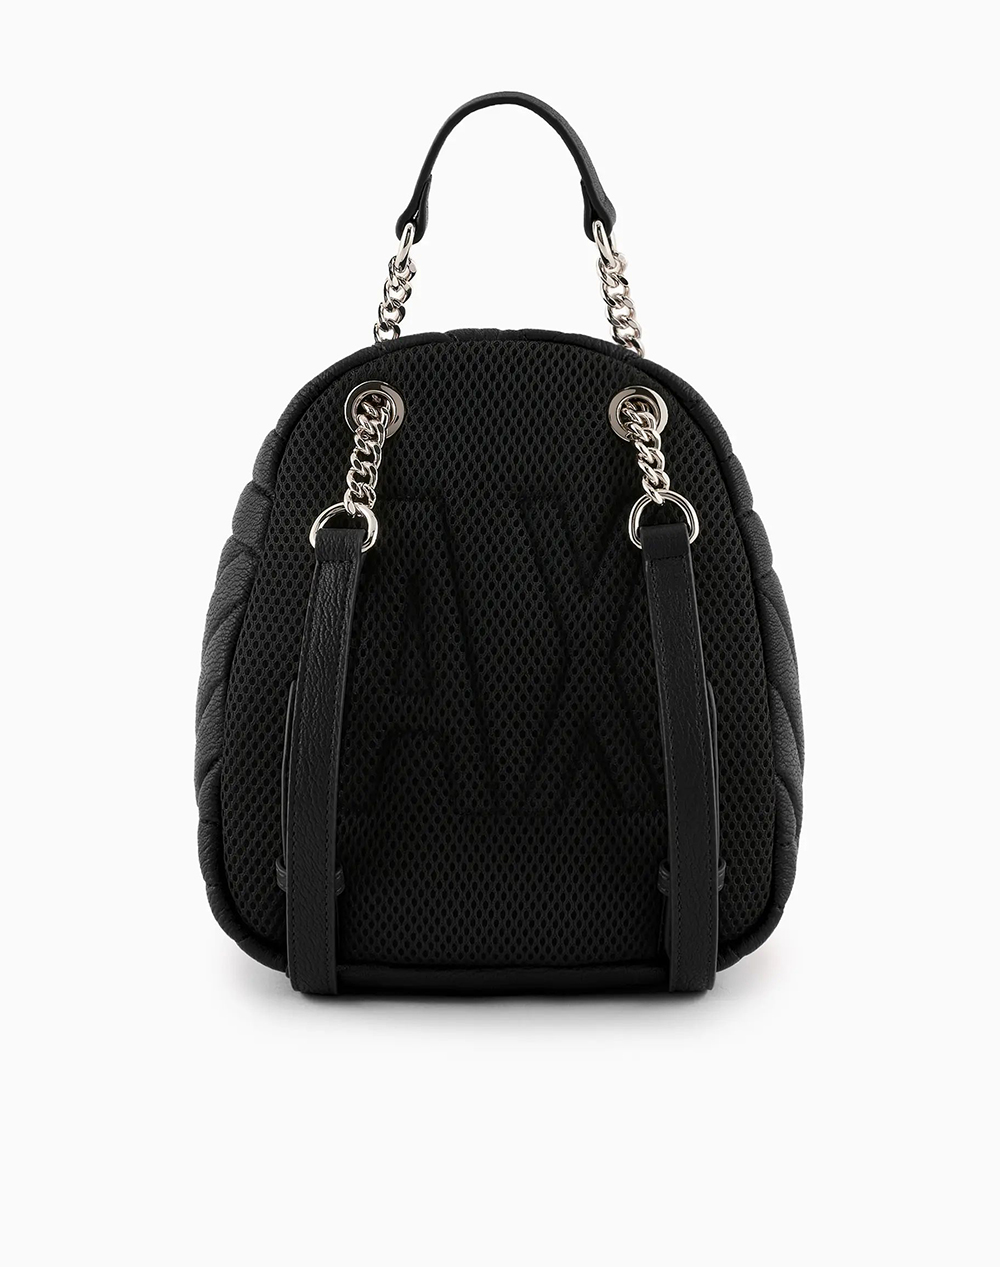 ARMANI EXCHANGE WOMANS BACKPACK S (Rozměry: 18 x 22 x 9 cm)